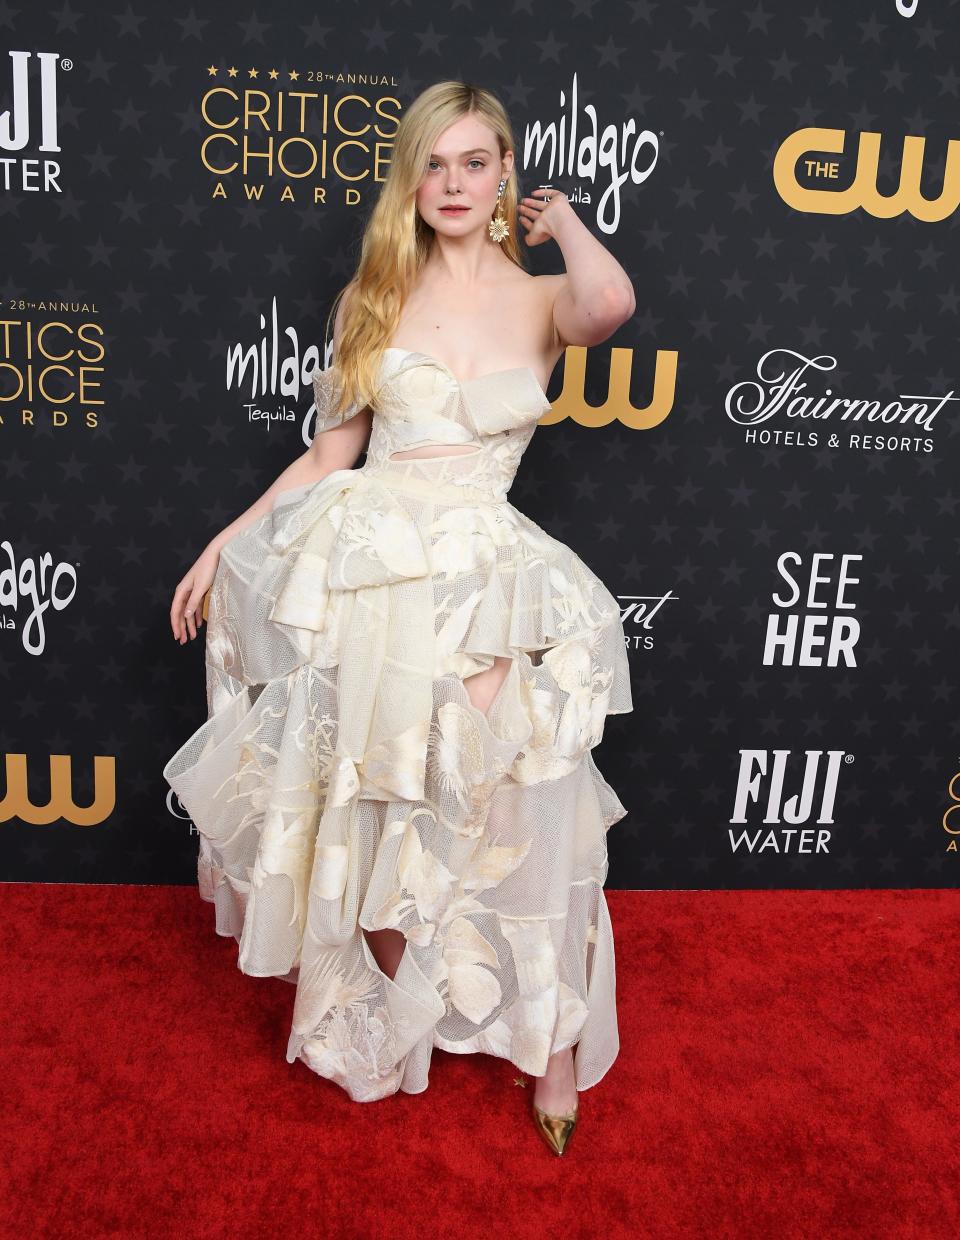 Elle Fanning arrives at the 28th Annual Critics Choice Awards at Fairmont Century Plaza on January 15, 2023 in Los Angeles, California.